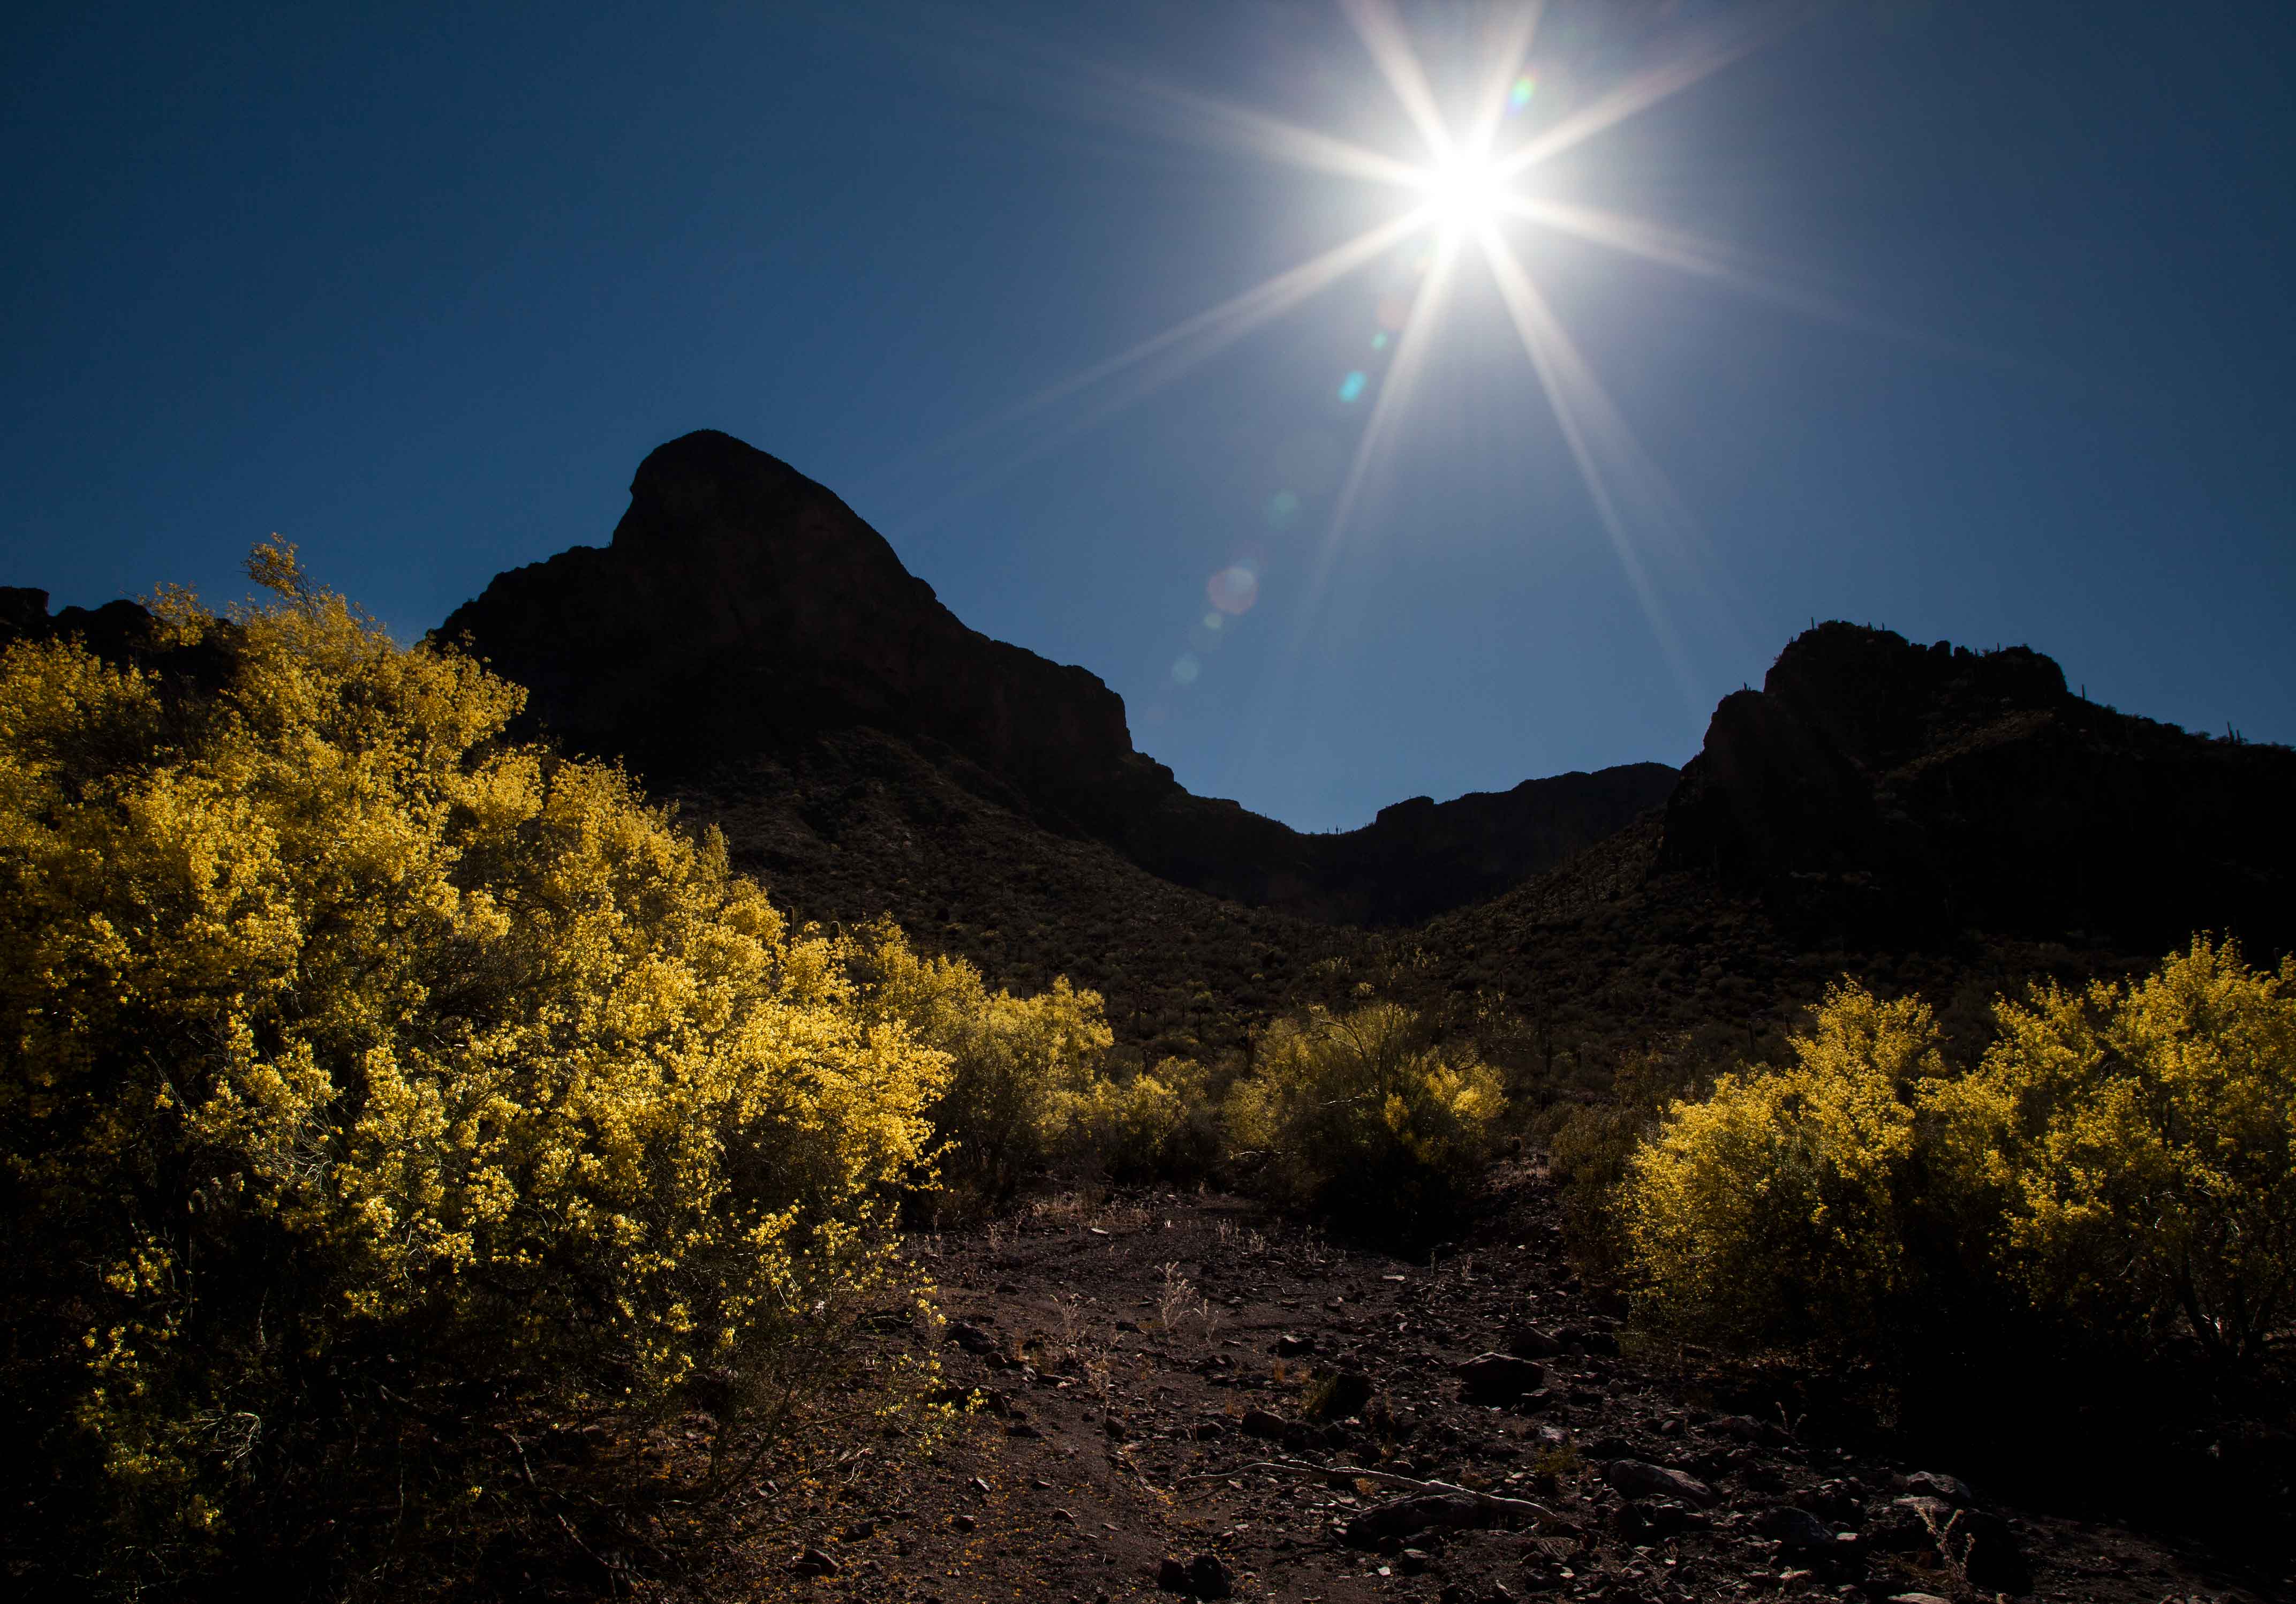 Palo Verde trees at Picacho Peak in the desert of southern Arizona